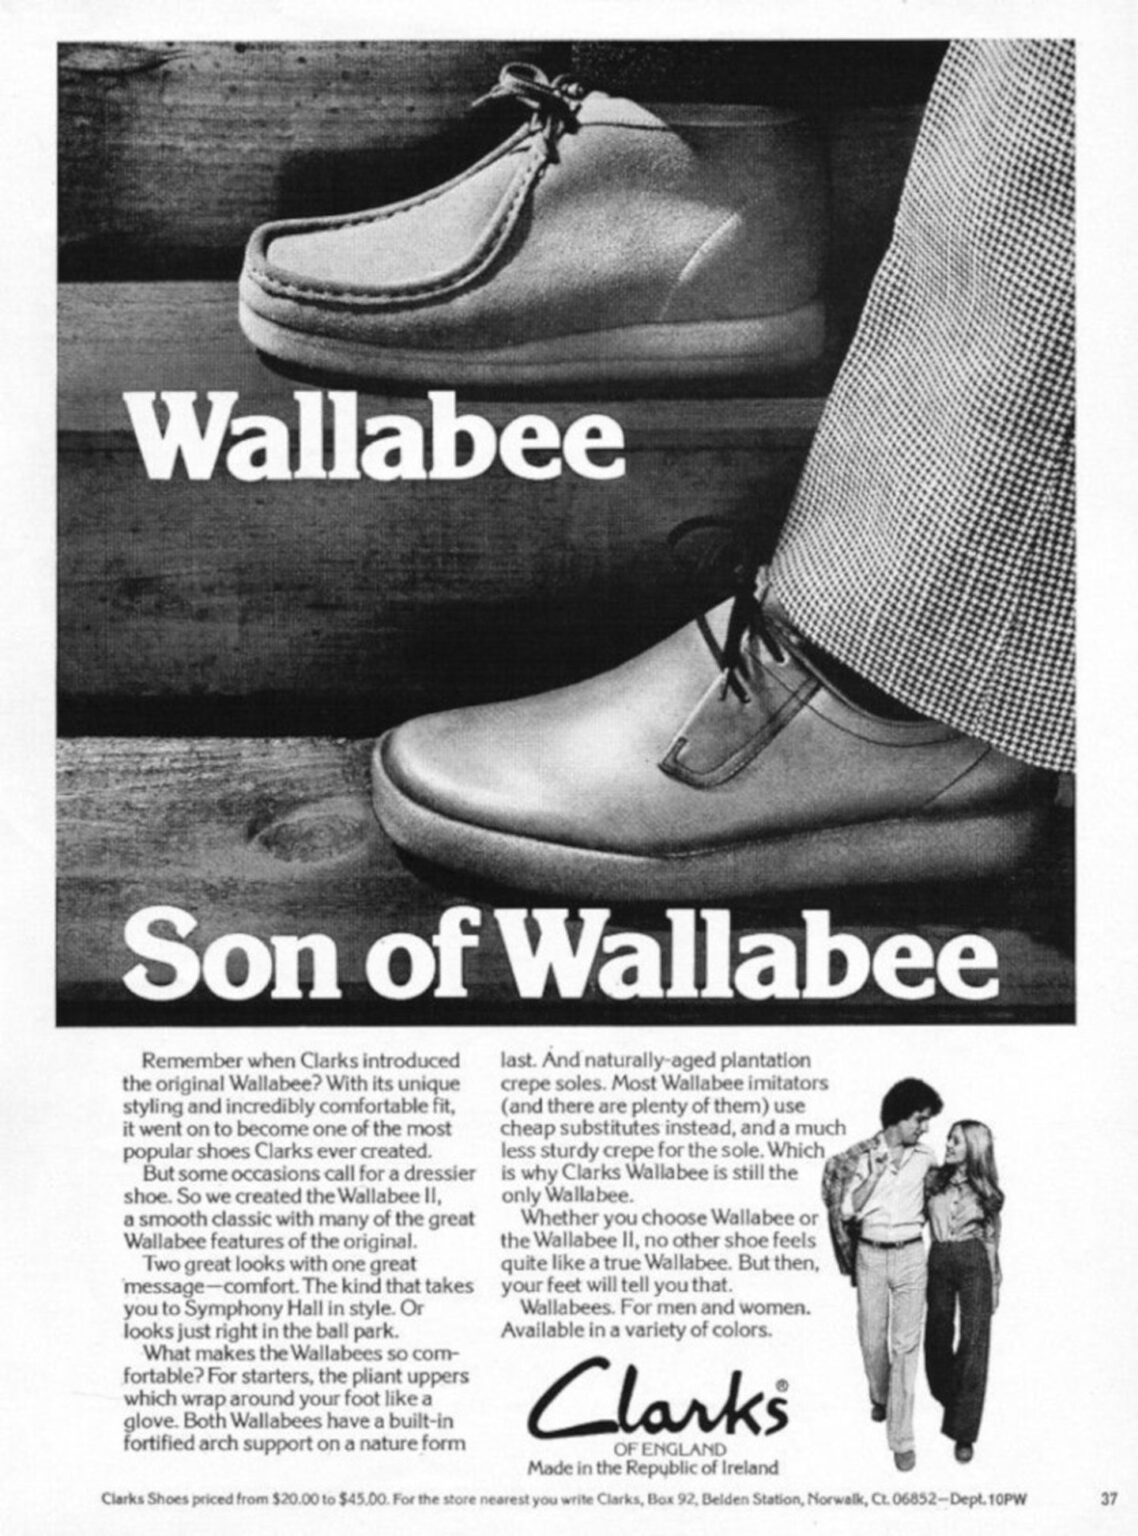 Did you buy Wallabees at Clarks shoe shop in Dundee?